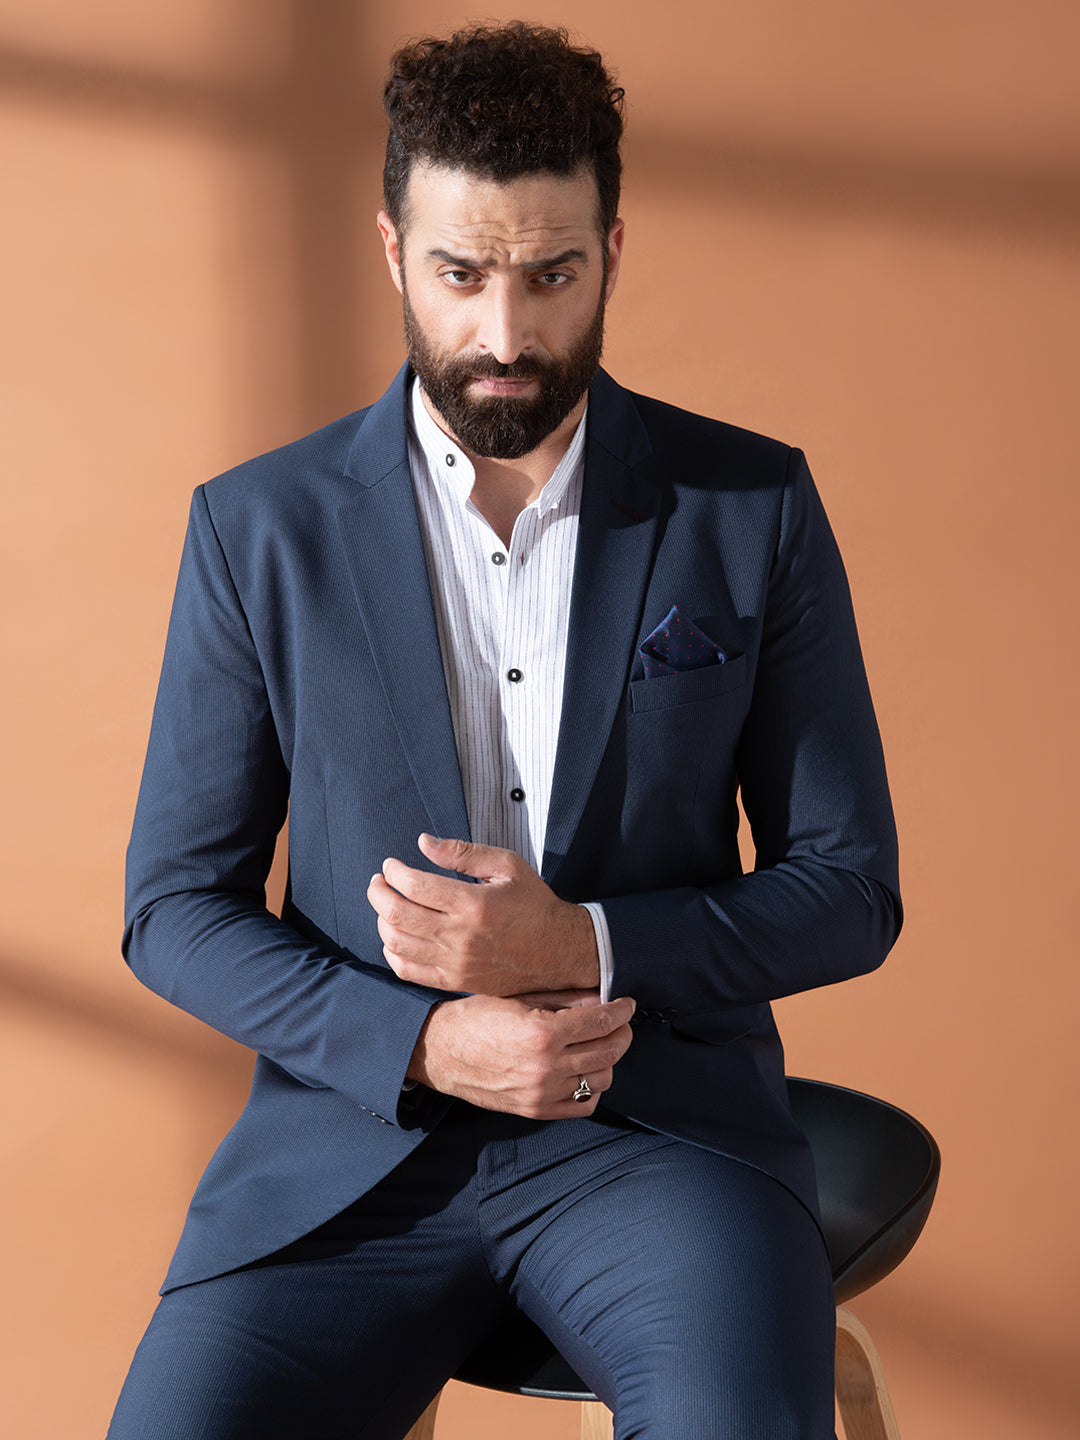 Navy double breasted linen jacket - Made in Italy